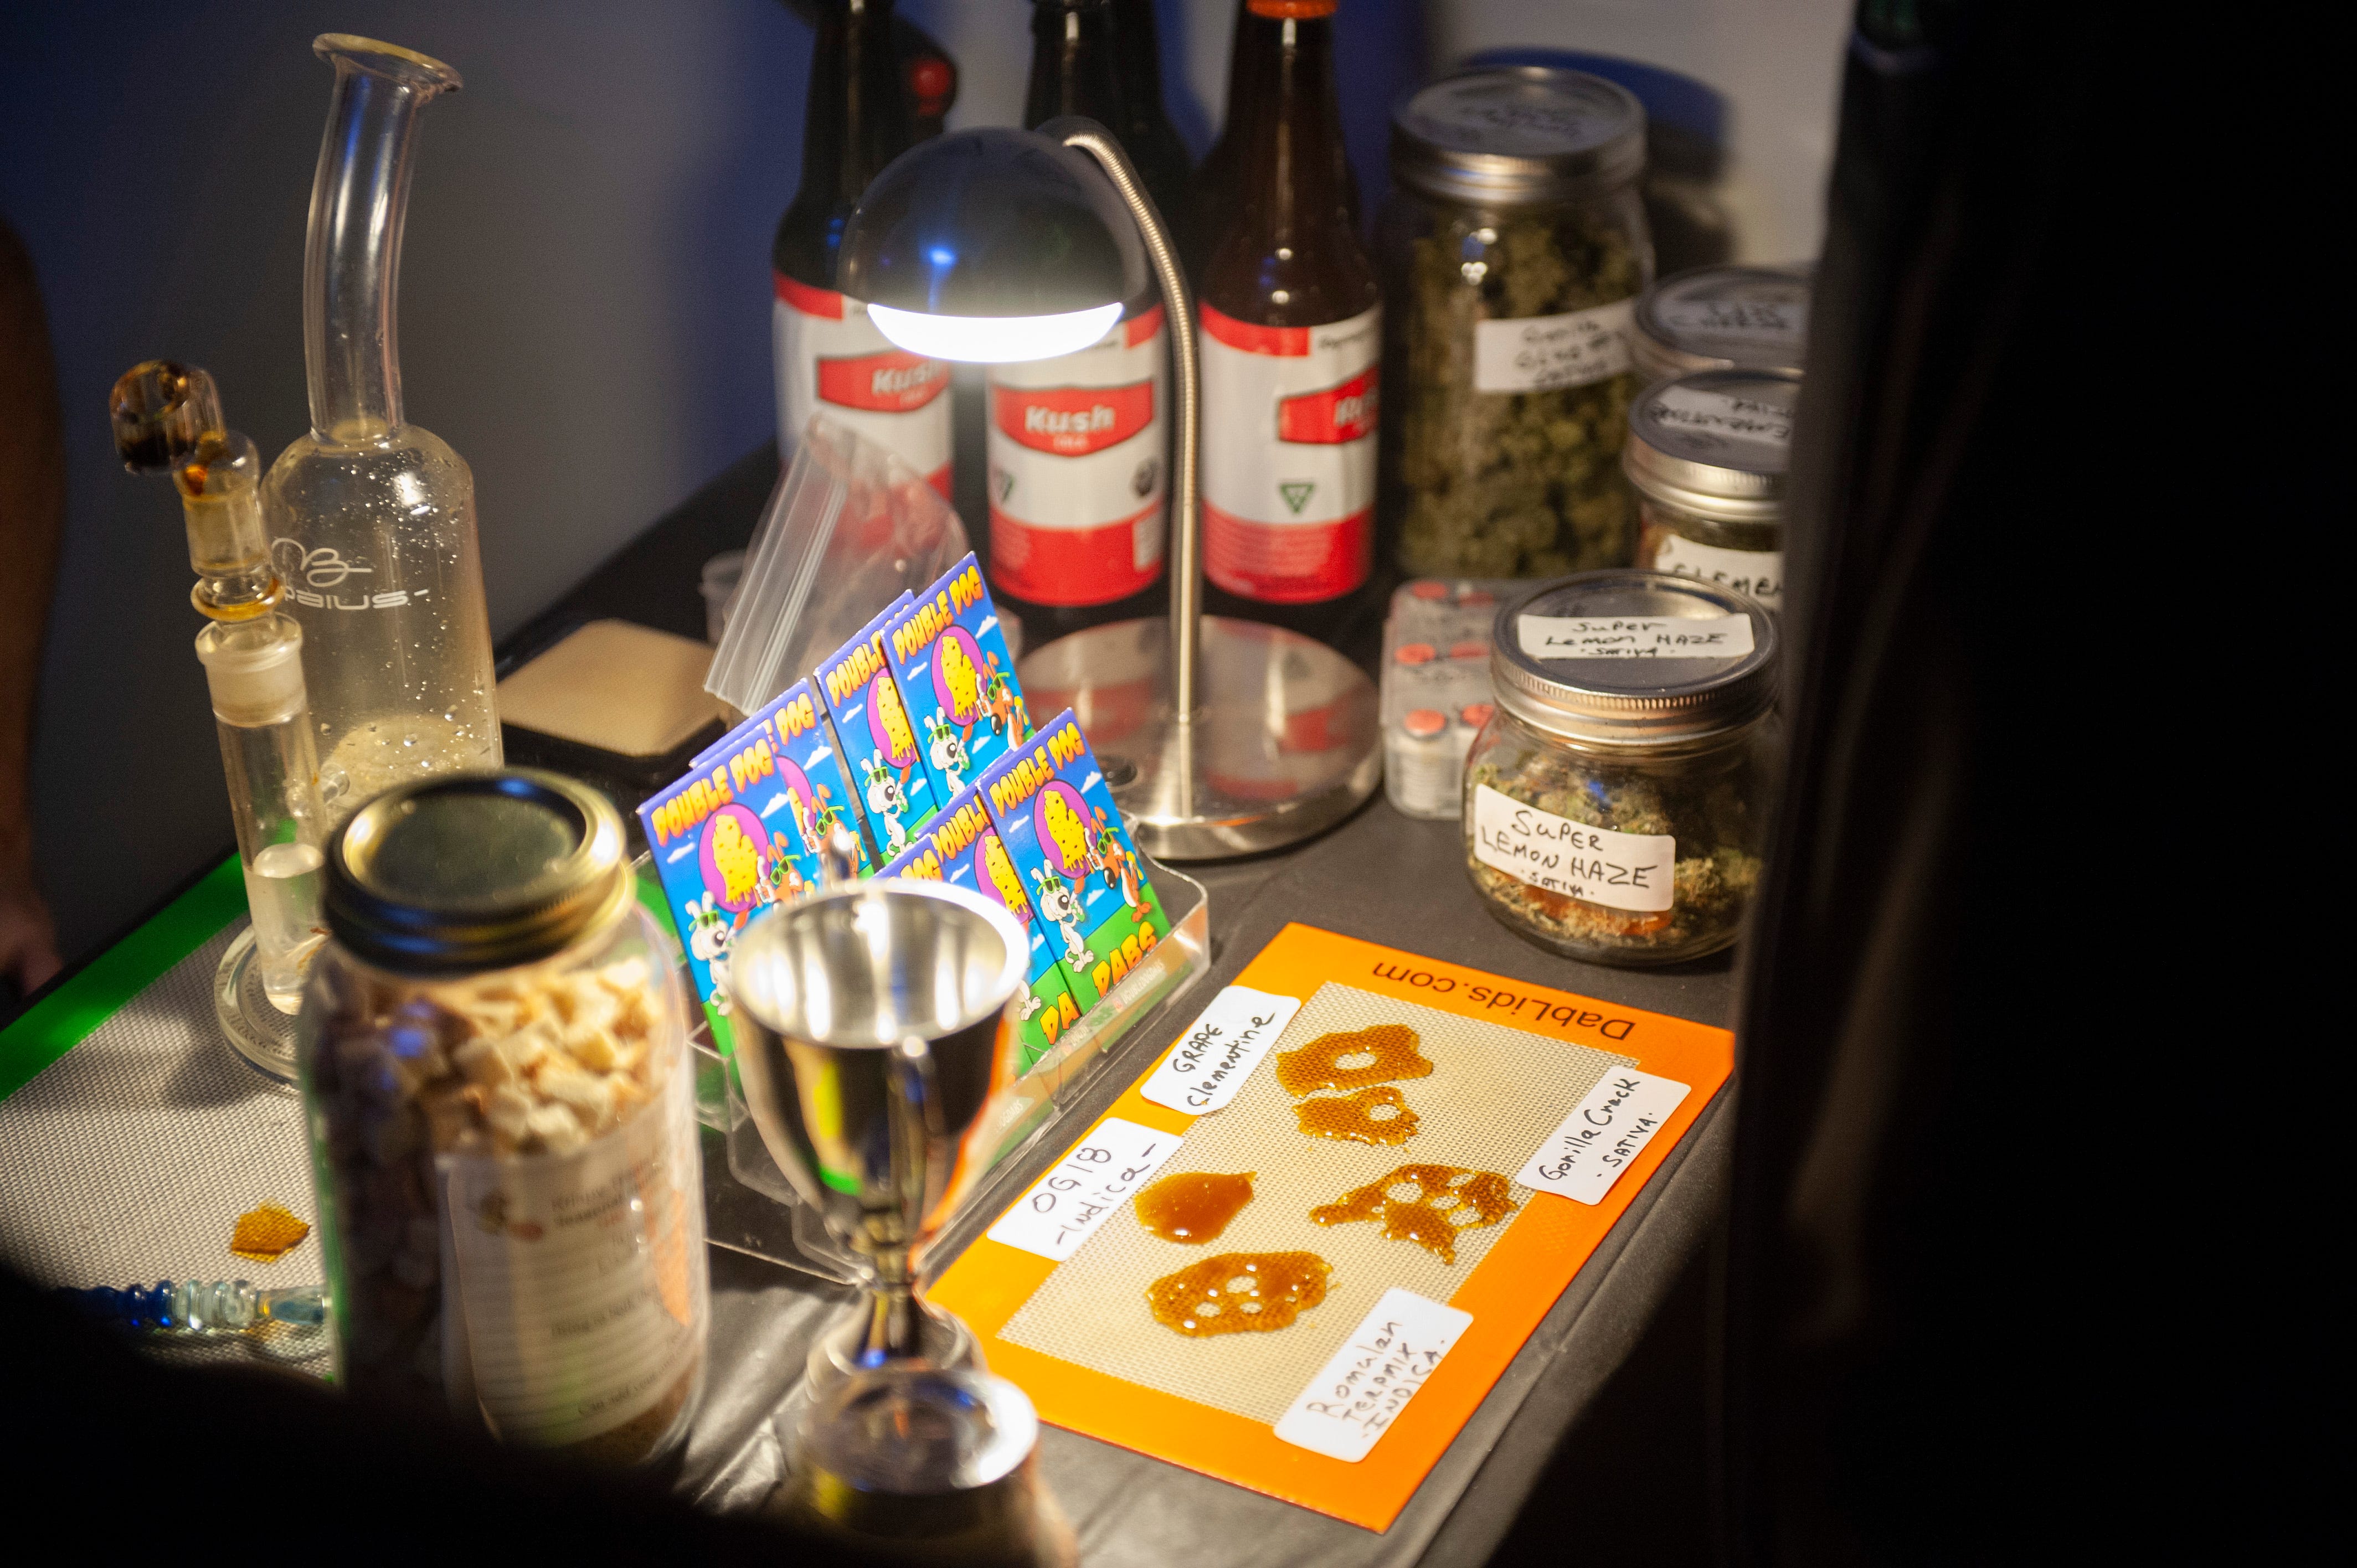 Double Dog Dabs display of cannabis products including "dabs," which are condensed THC resins usually smoked in a glass bong and various strains of marijuana buds and THC-infused Kush Cola at "The Art of Cannabis" event.